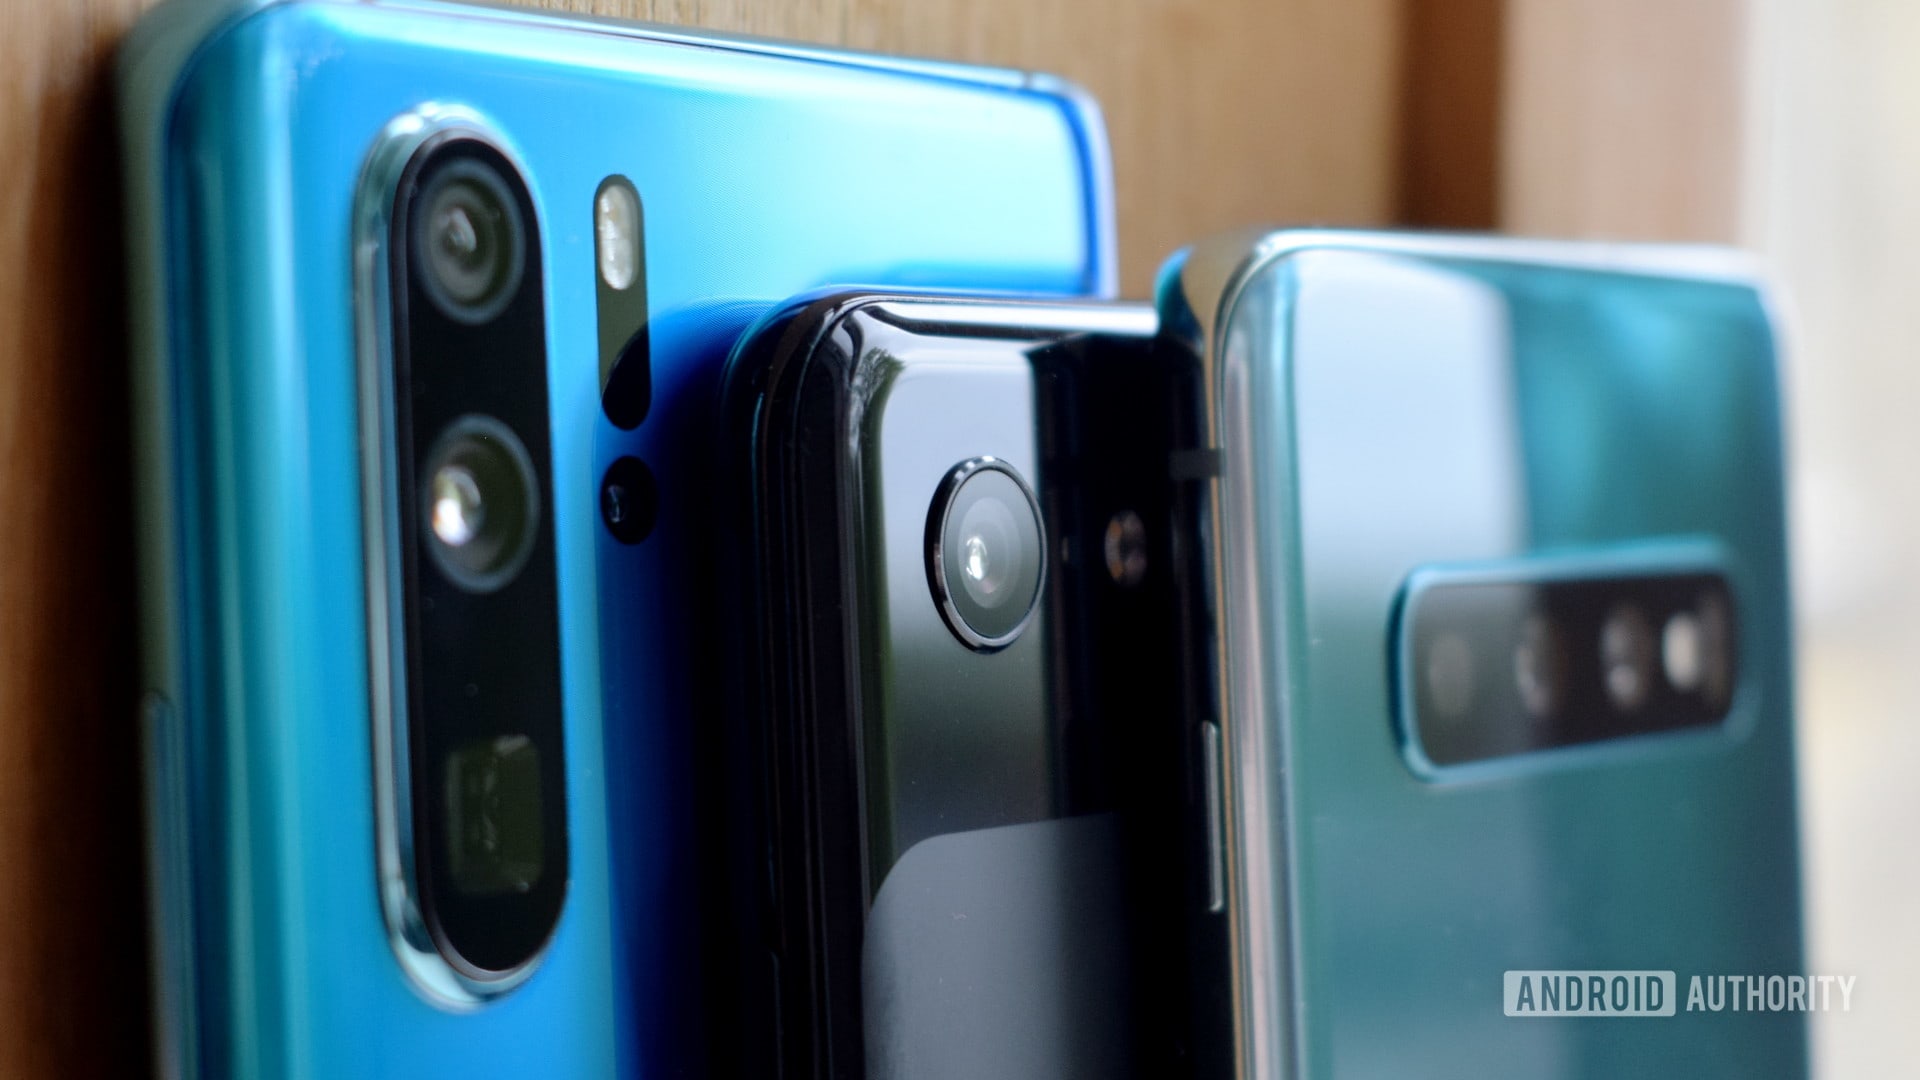 Google Pixel 3 camera in focus, with Huawei P30 Pro and Galaxy S10 besides